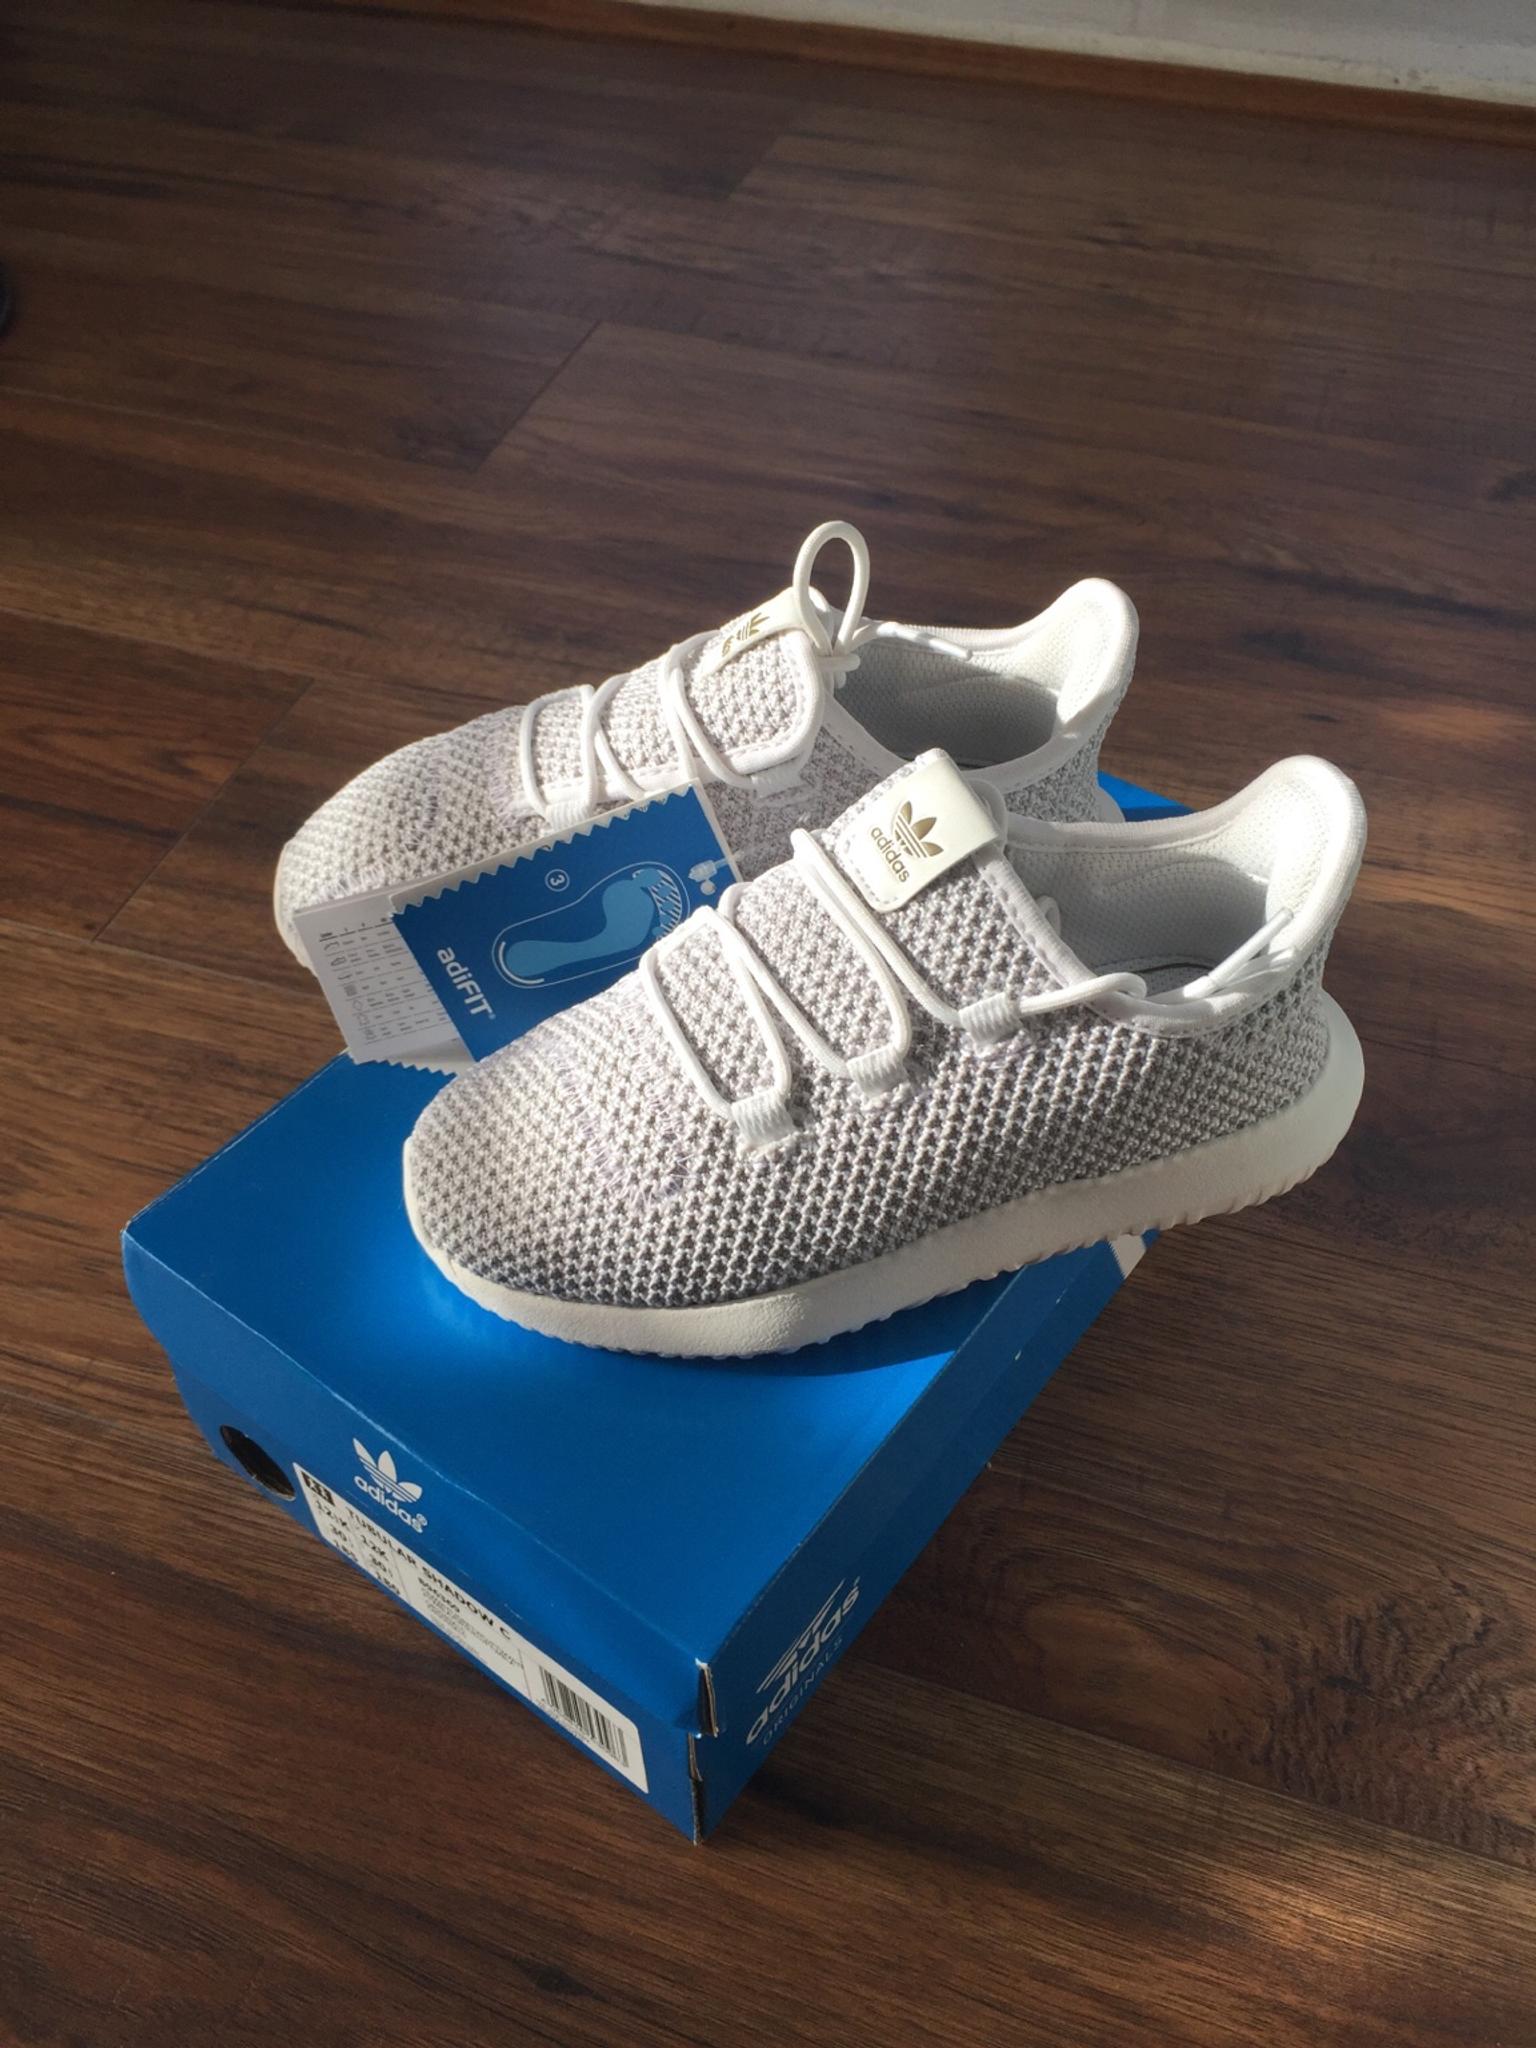 childrens adidas trainers